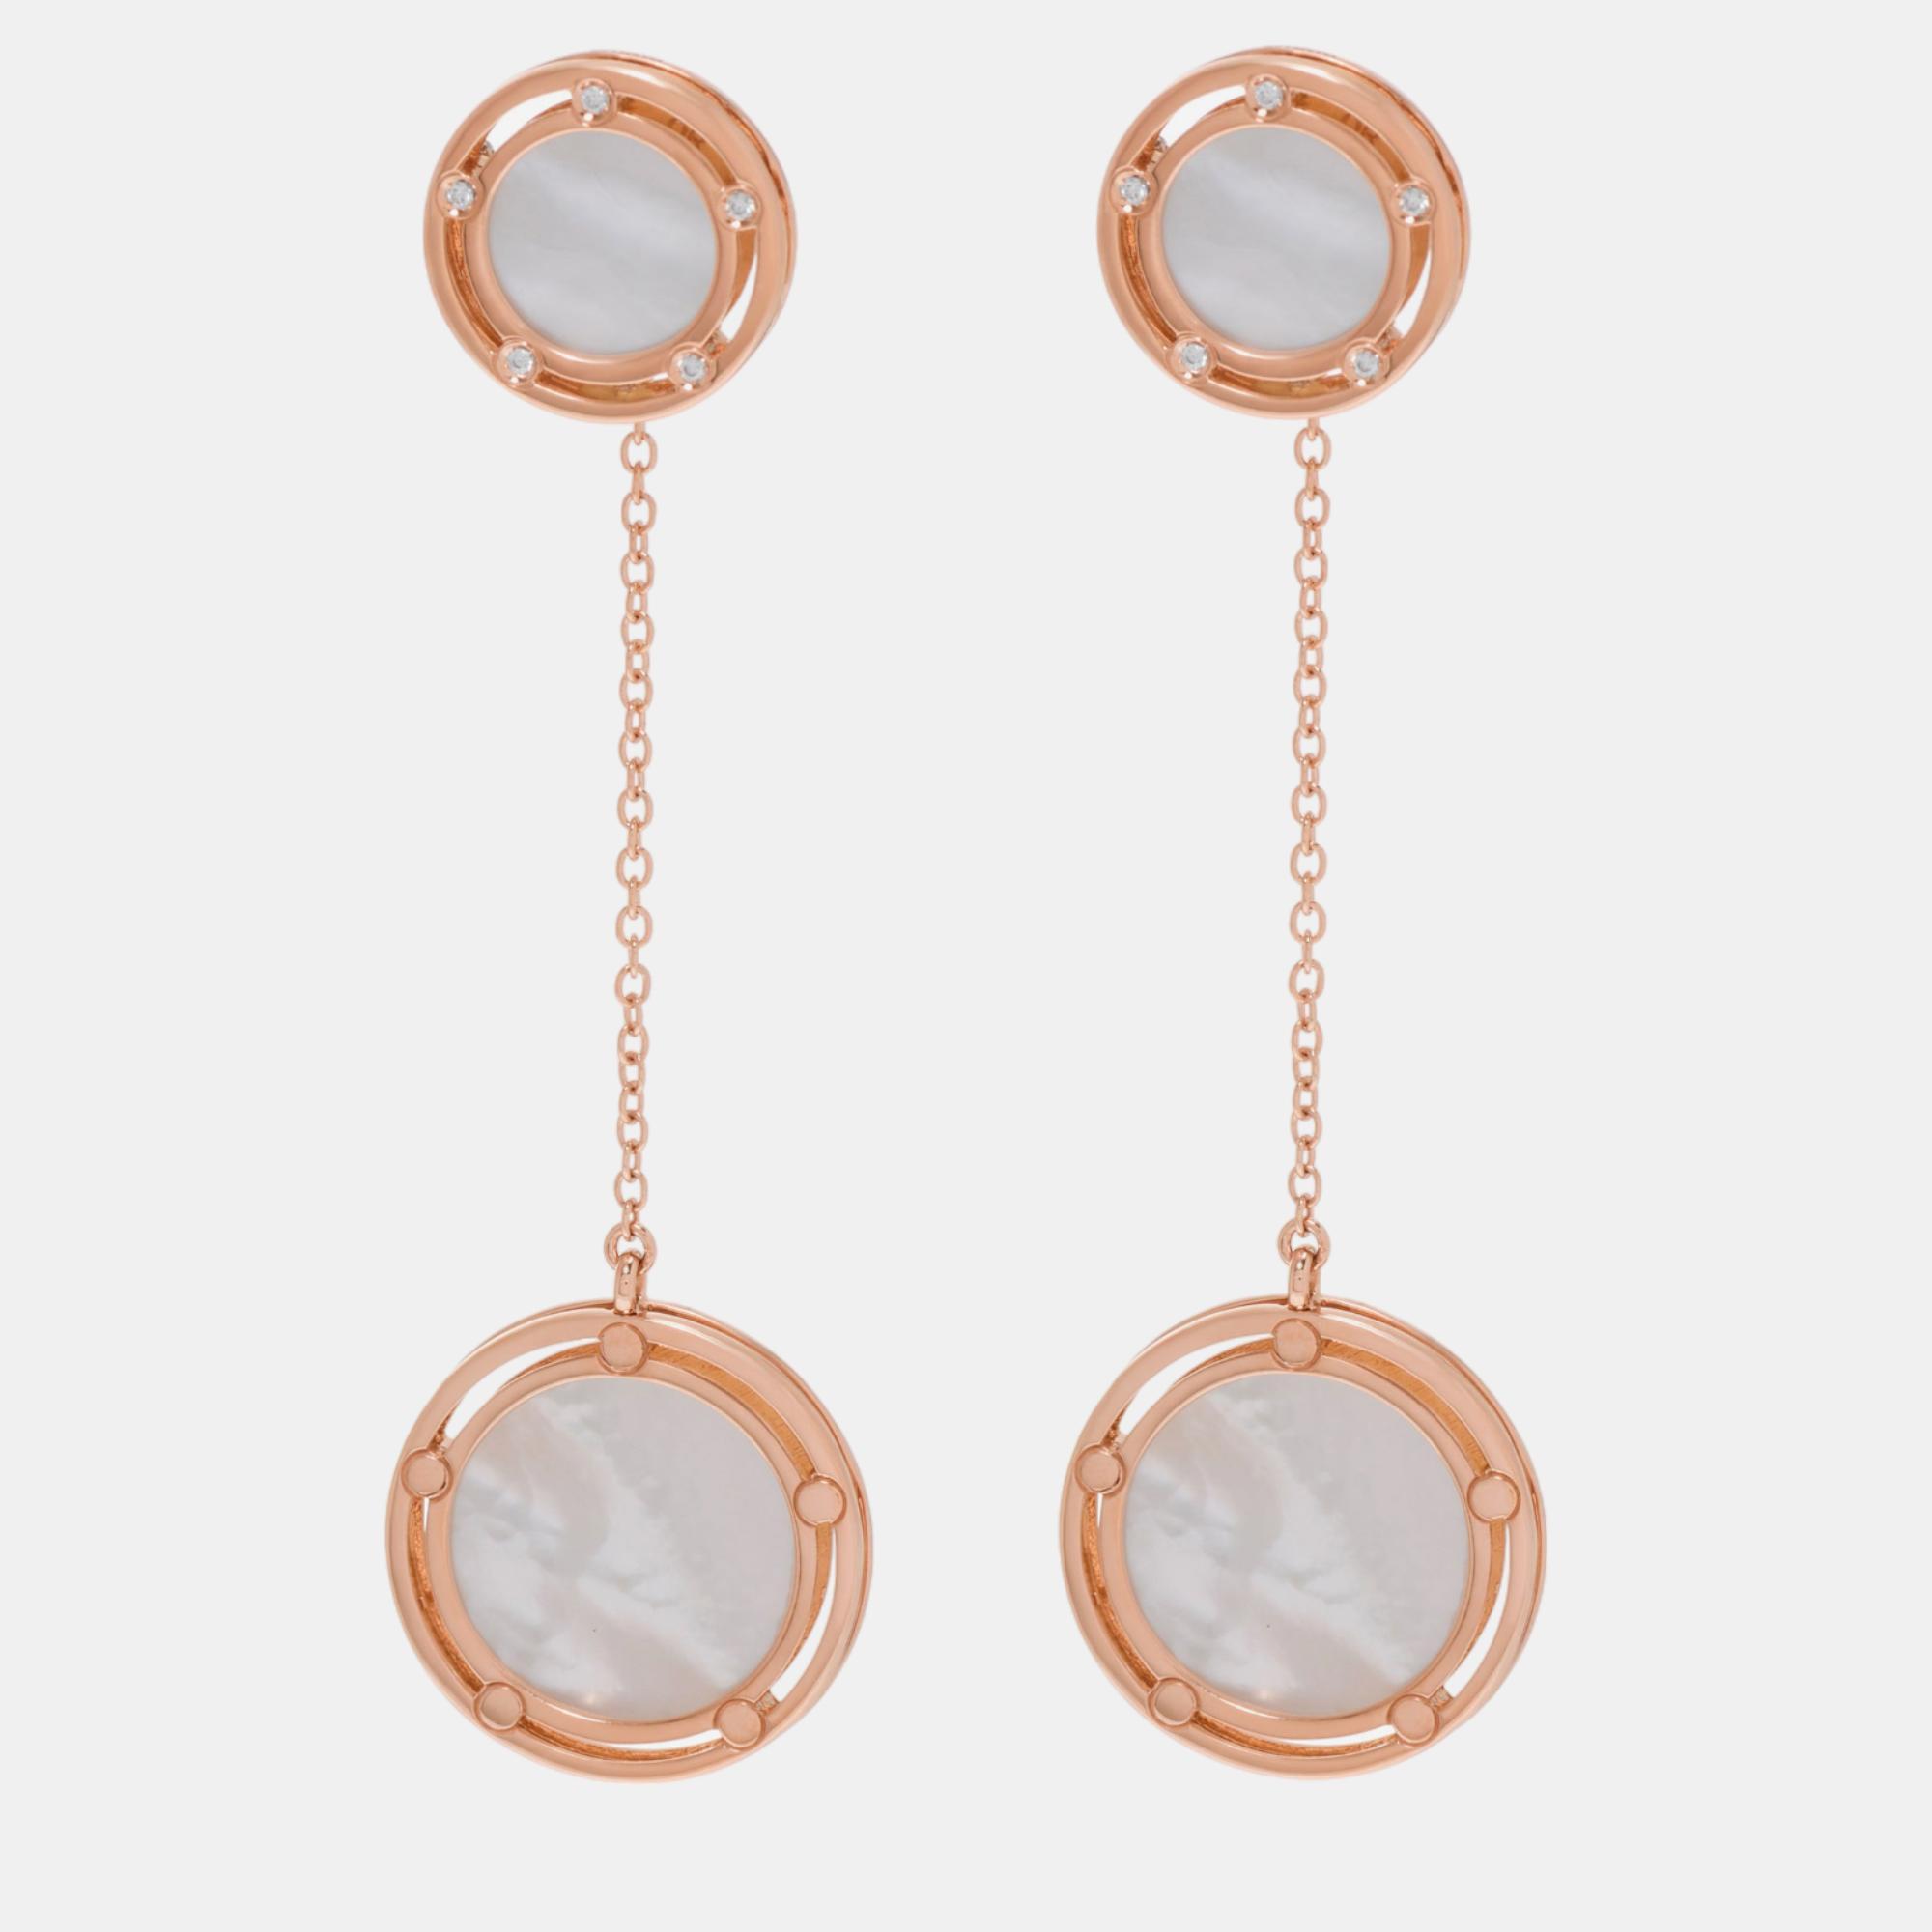 Damiani d.side 18k rose gold diamond and mother of pearl drop earrings